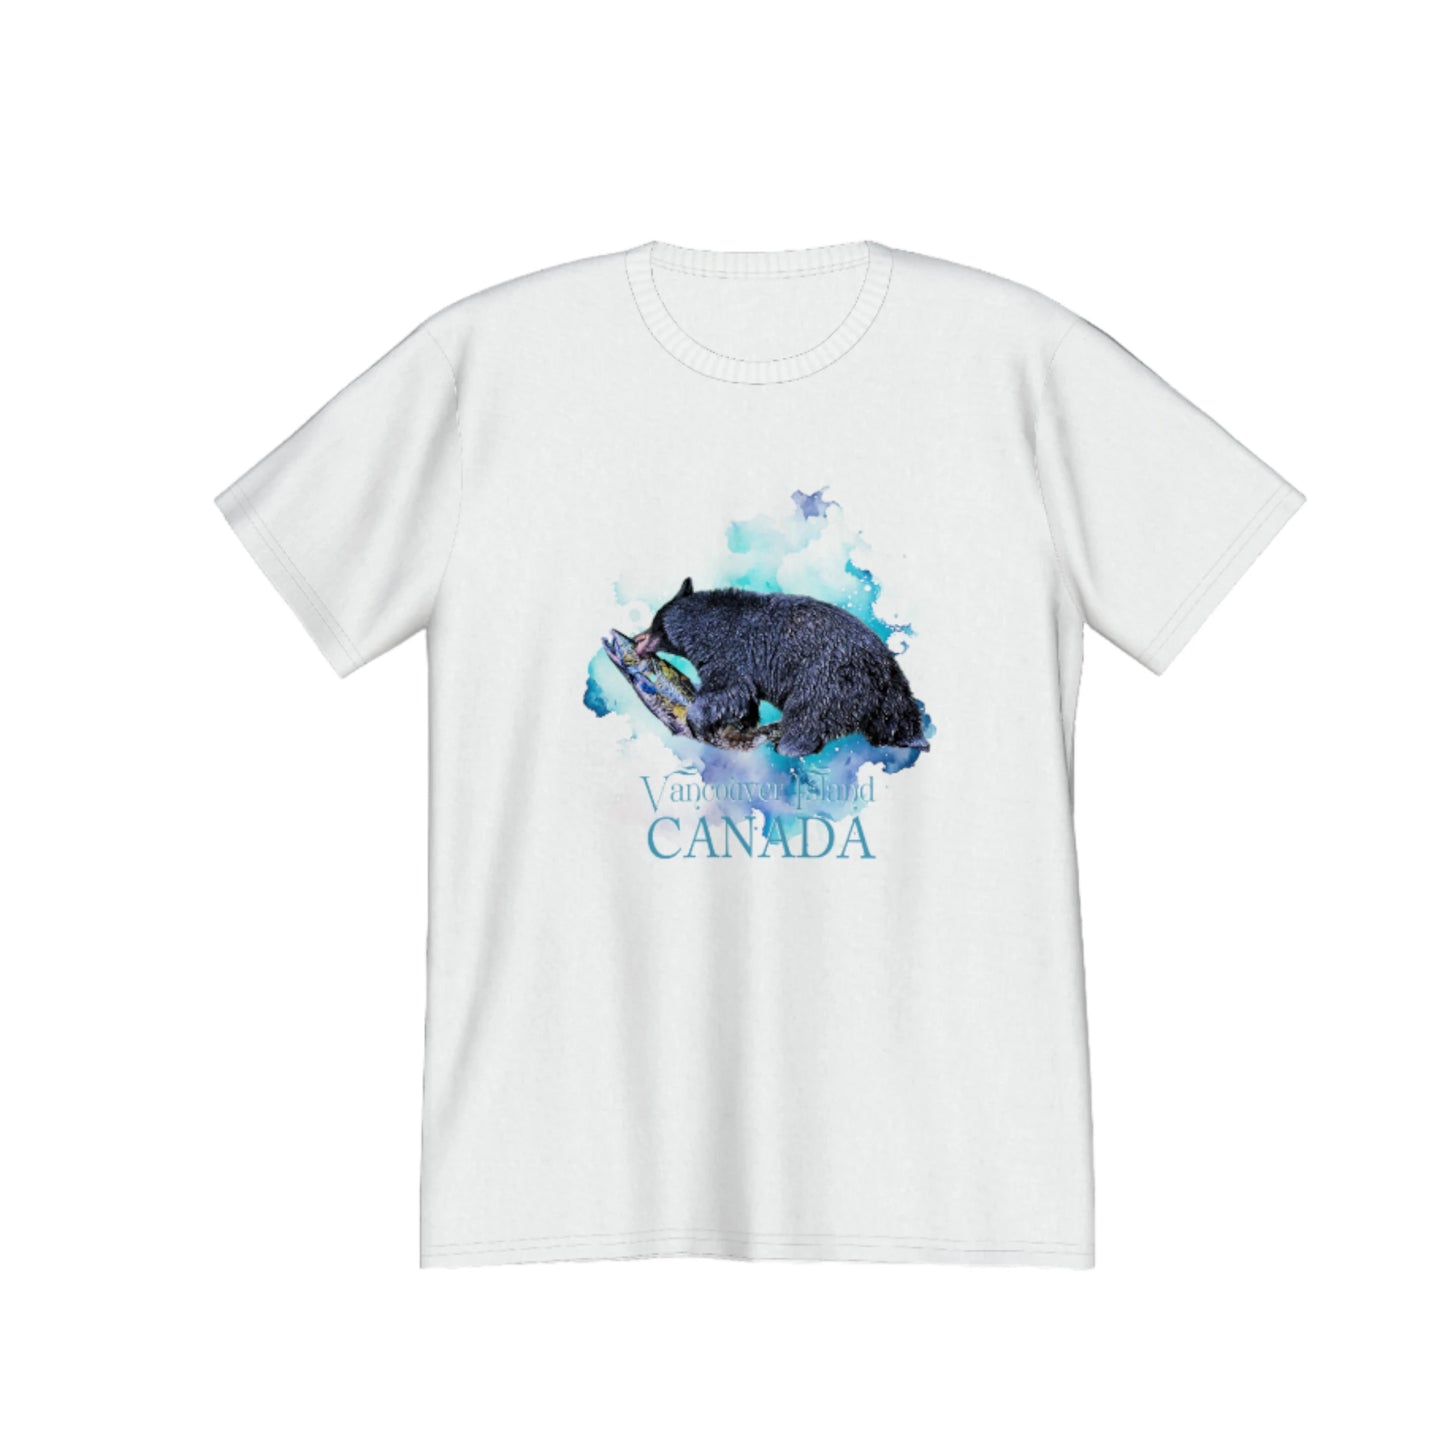 Salmon Bear Vancouver Island Canada souvenir premium unisex t-shirt.  the image on the front of the shirt is of a bear with a fresh caught salmon with a abstract of blues and green colours in the background. by van isle goddess dot com